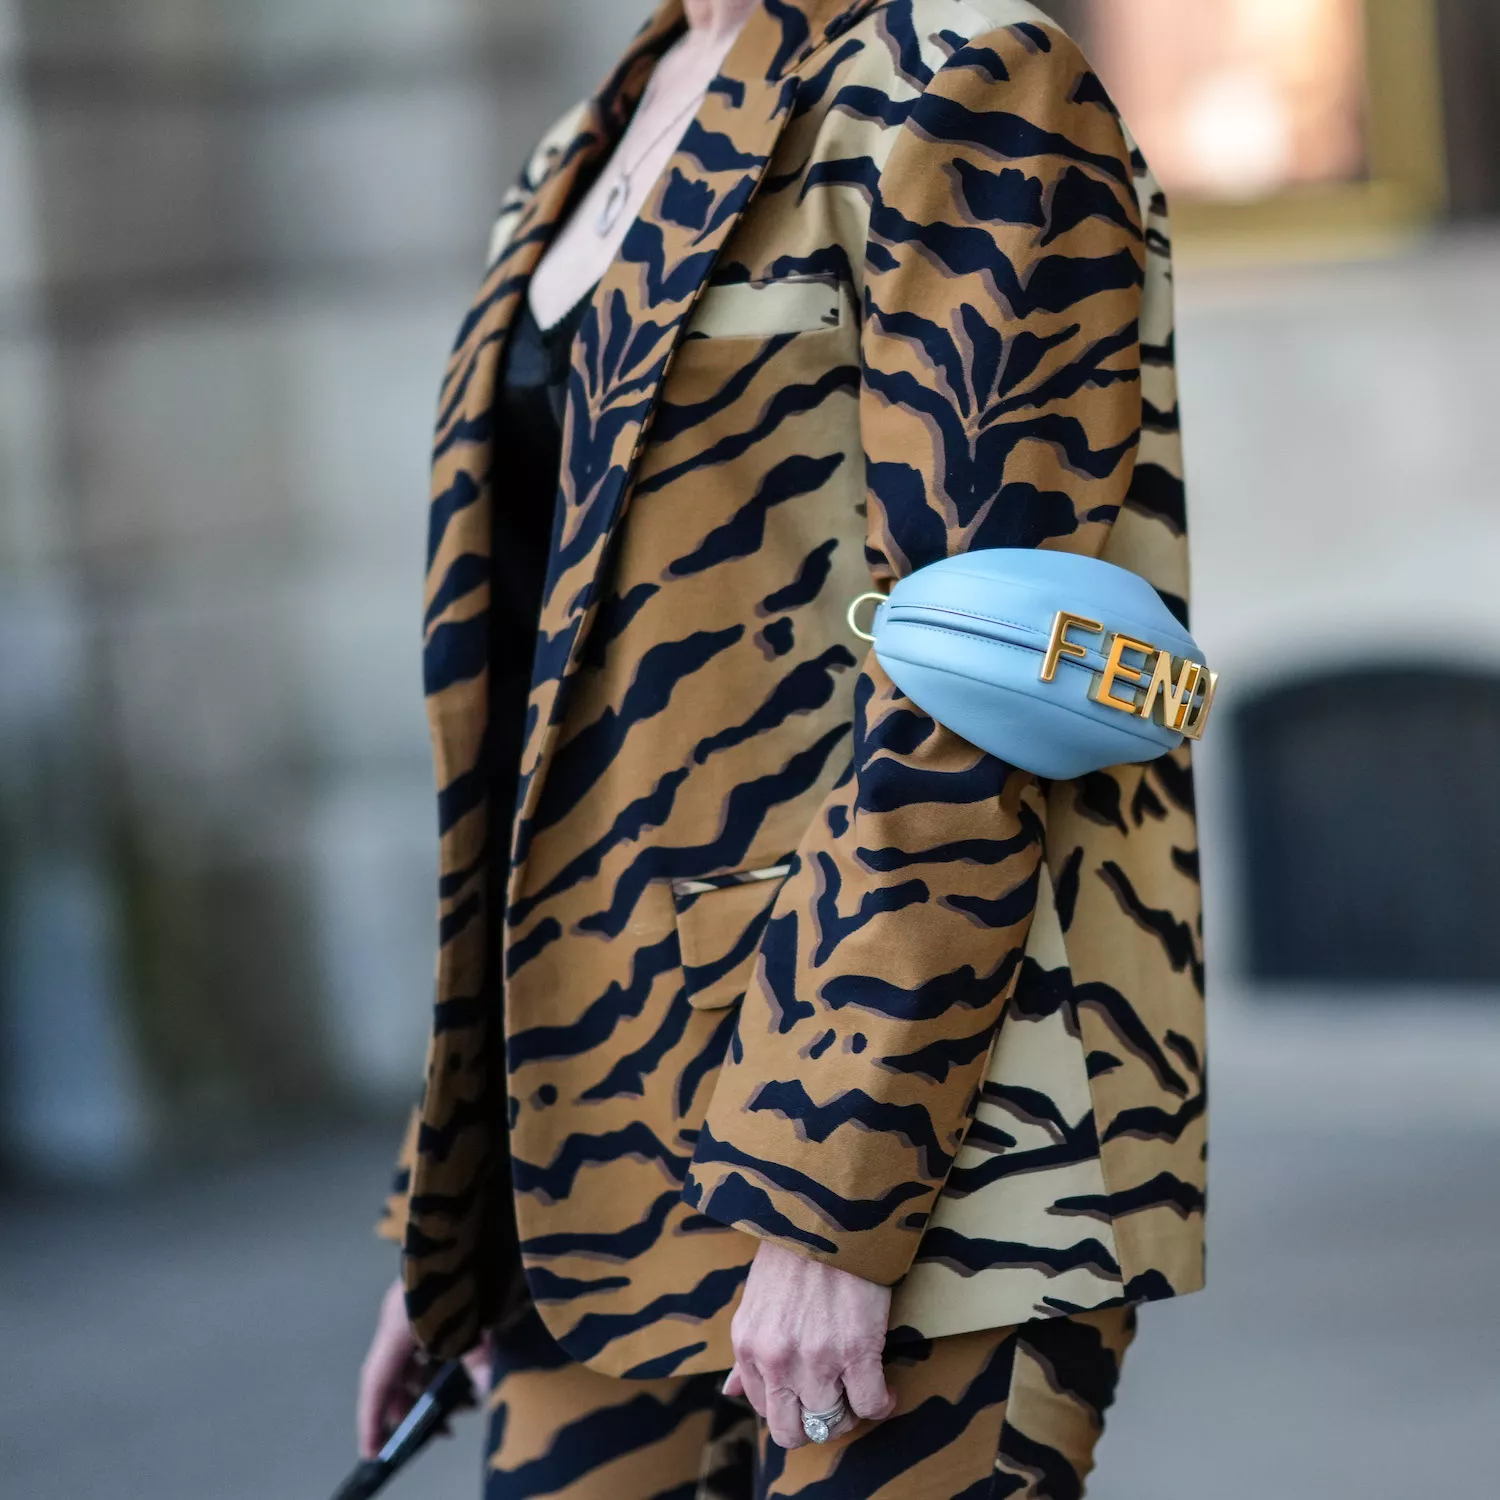 Close-up of woman wearing tiger print suit and baby blue Fendi bracelet bag